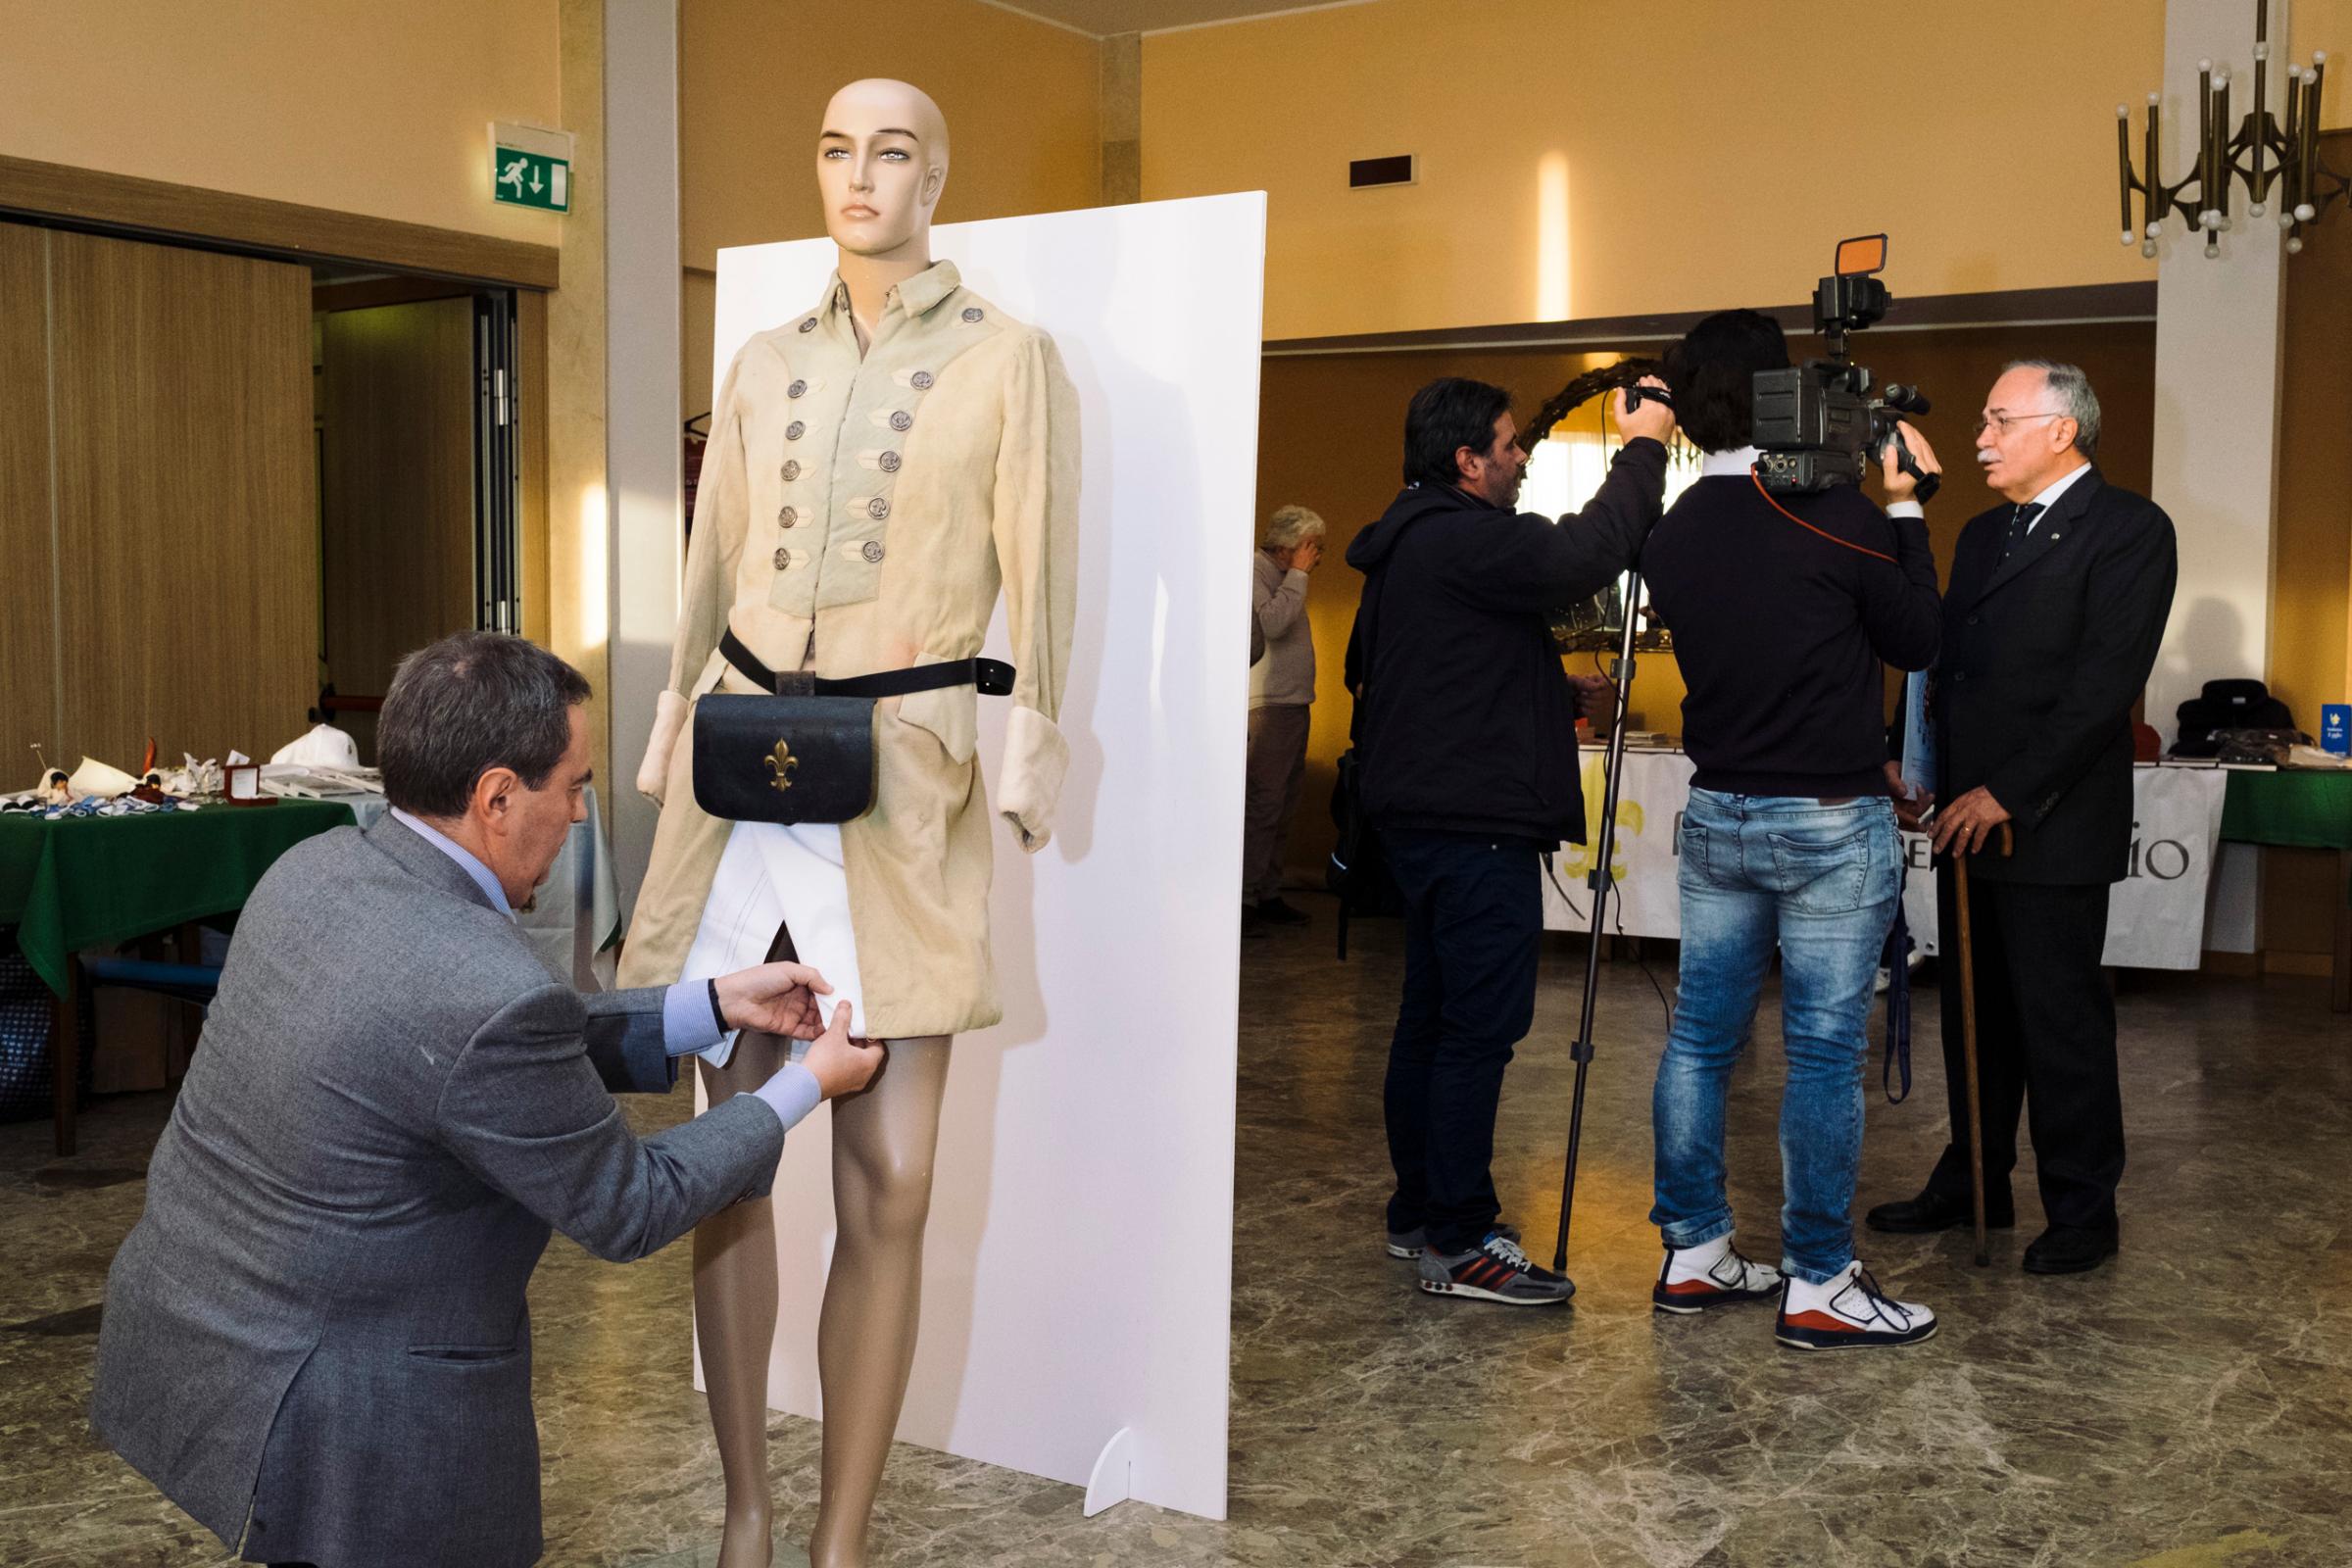 A mannequin with the uniform of an old Bourbon soldier is set up in Gaeta during the annual "Neo-Bourboun Cultural Association" (Movimento Neoborbonico) meeting, February, 2016. The association meets up every year in Gaeta to remember the siege of the city in one of the last battles before unification.